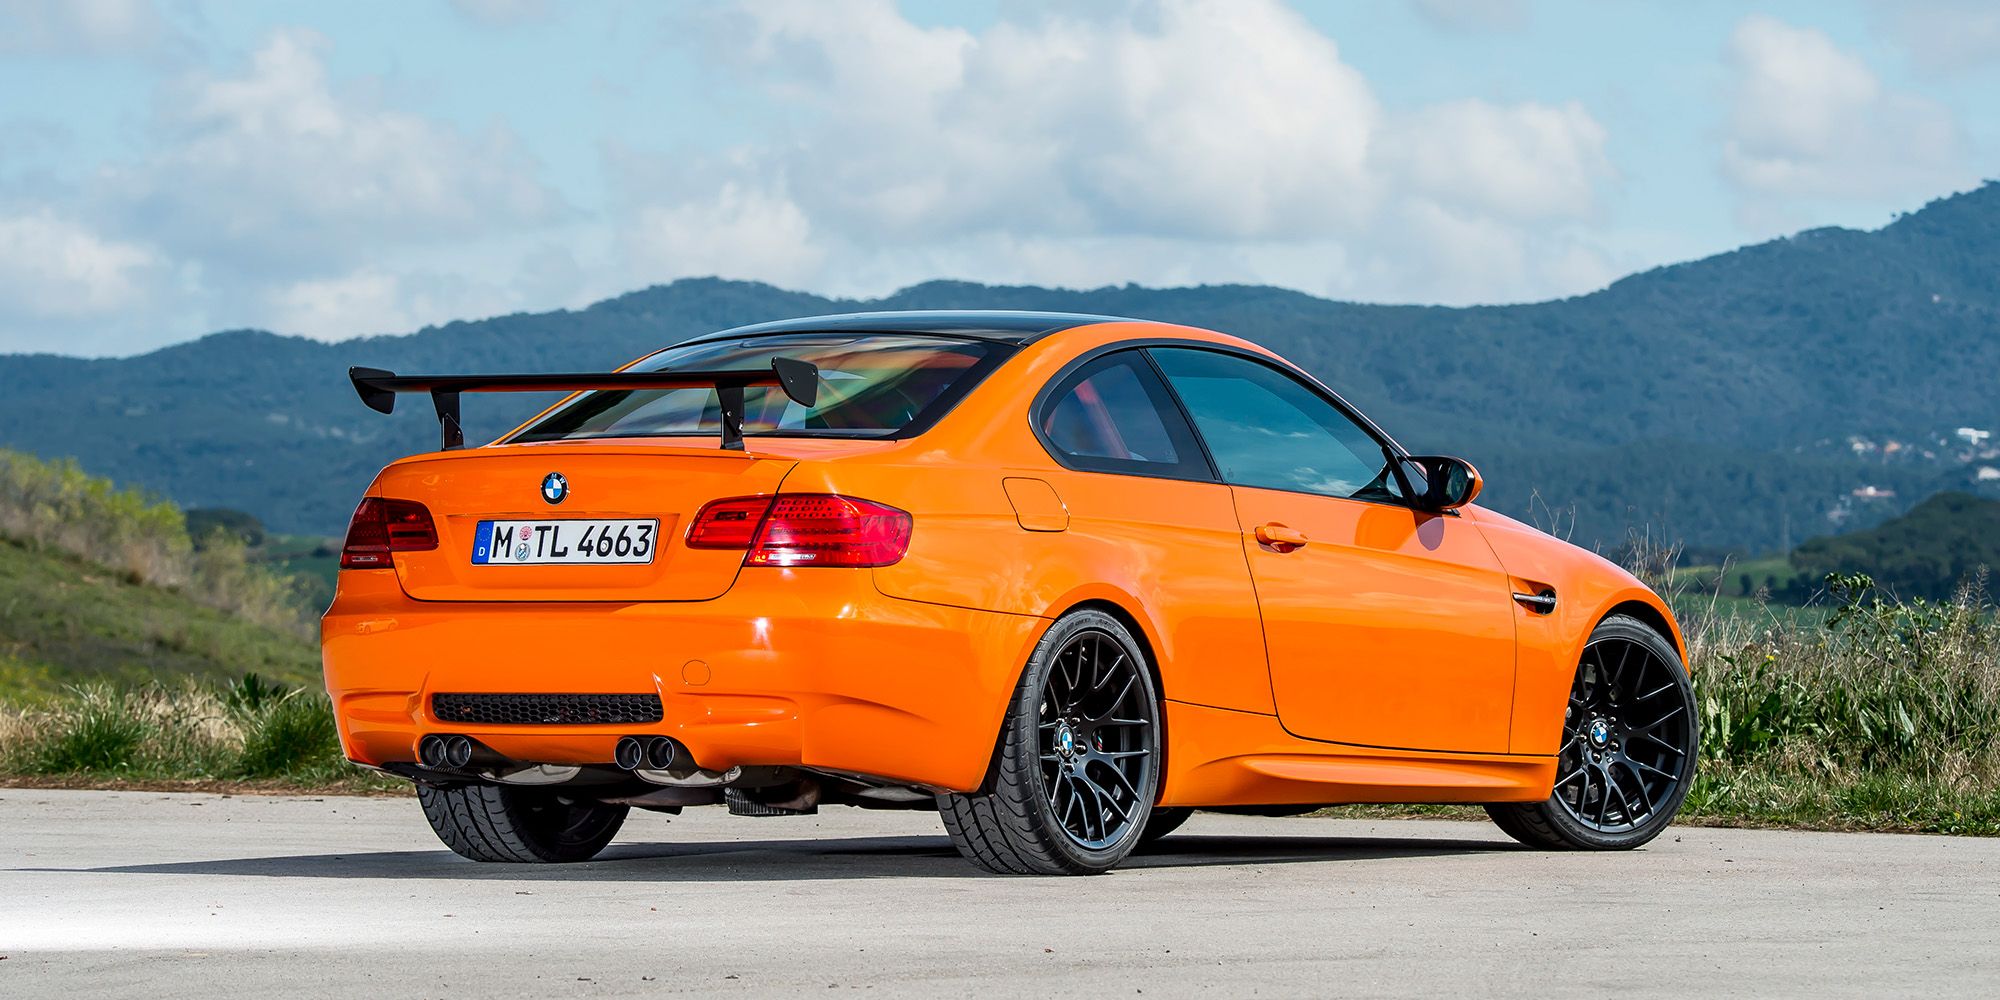 The rear of the M3 E92 GTS